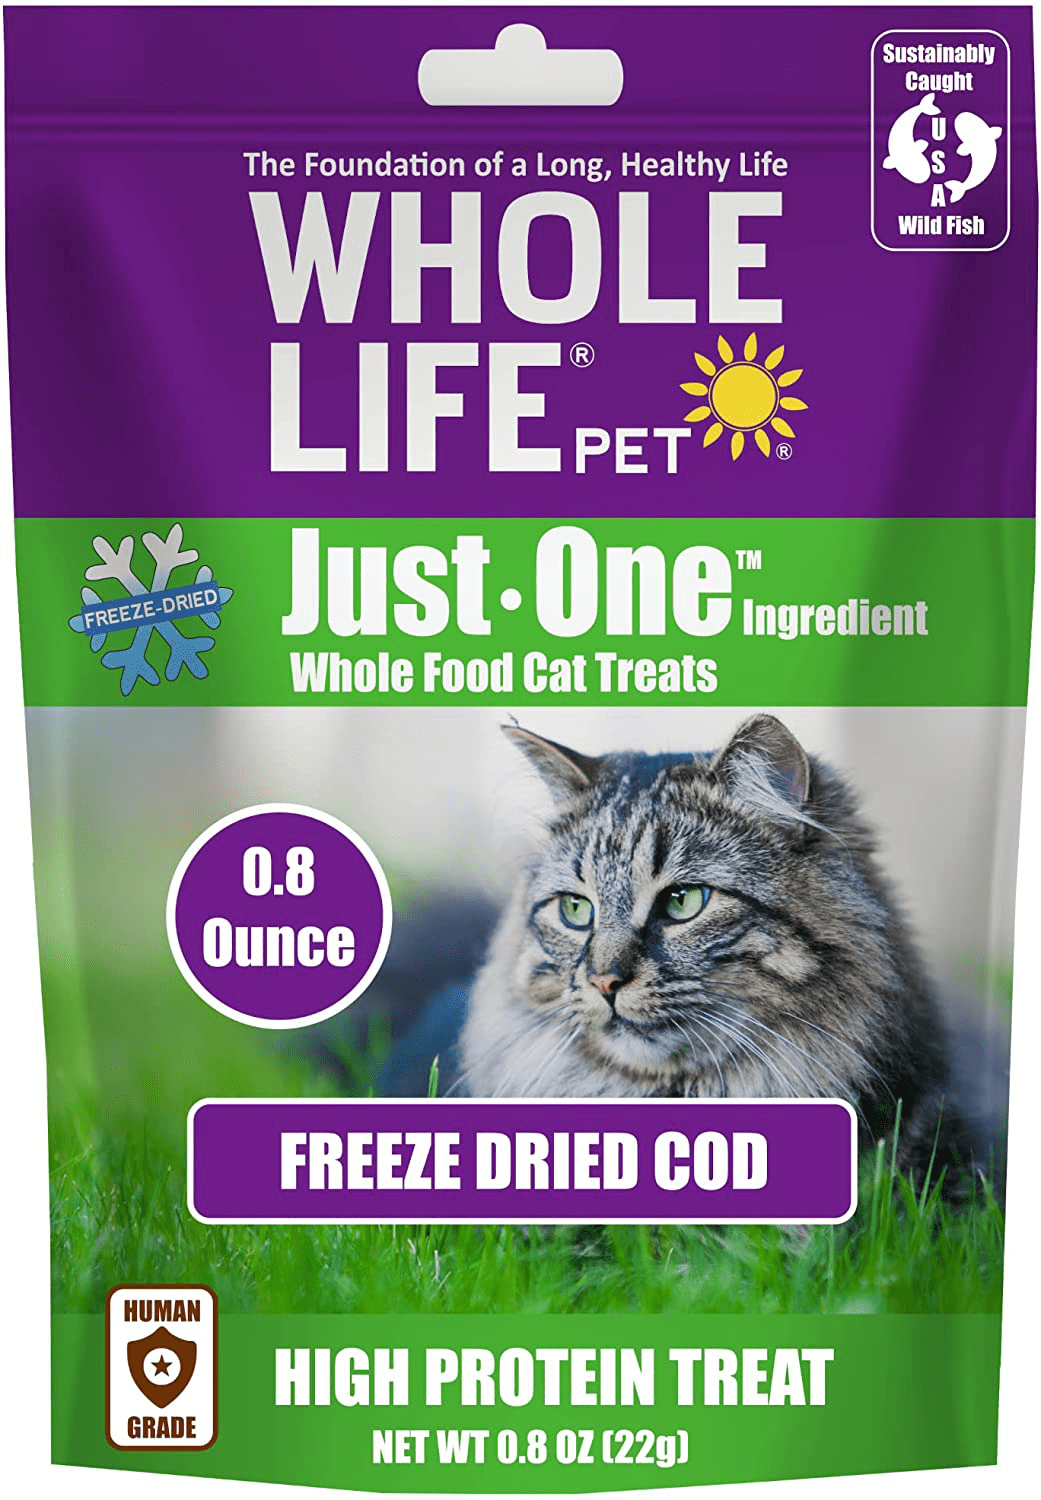 Whole Life Pet USA Sourced and Produced Human Grade Freeze Dried Boneless, Skinless Wild Cod Filet Cat Treat, Protein Rich for Training, Picky Eaters, Digestion, Weight Control